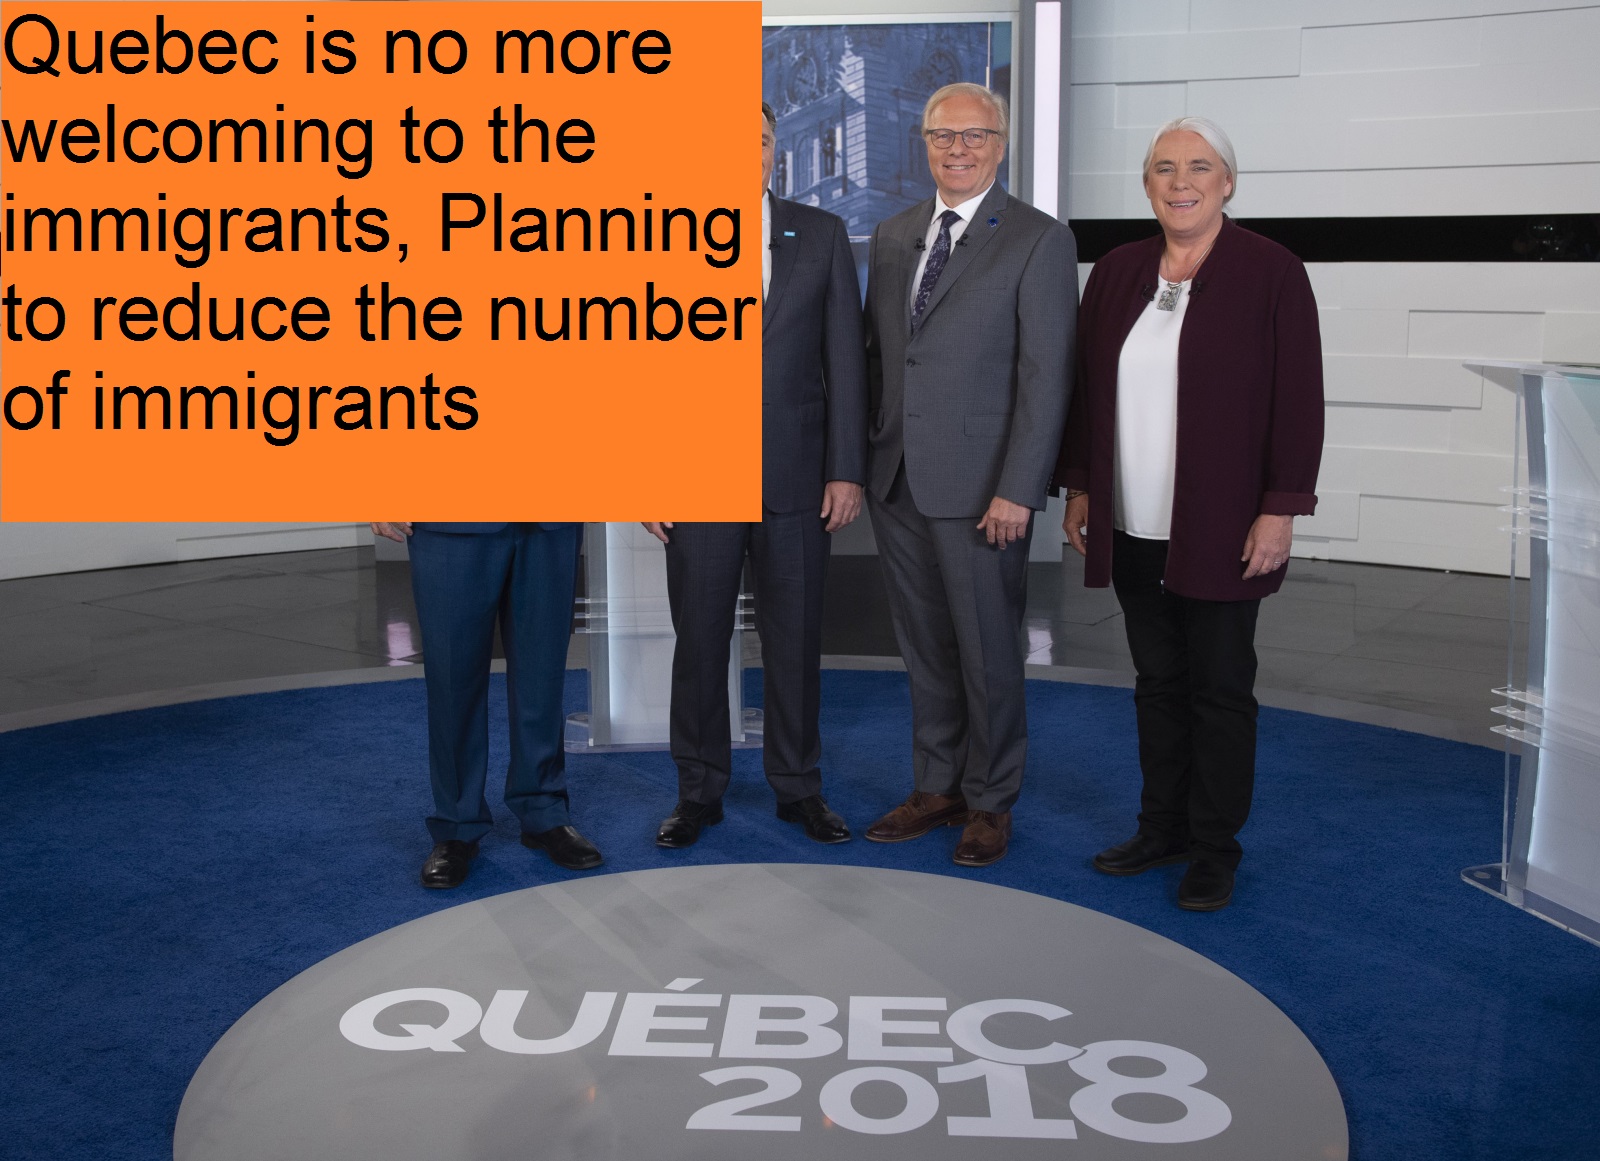 Quebec is no more welcoming to the immigrants